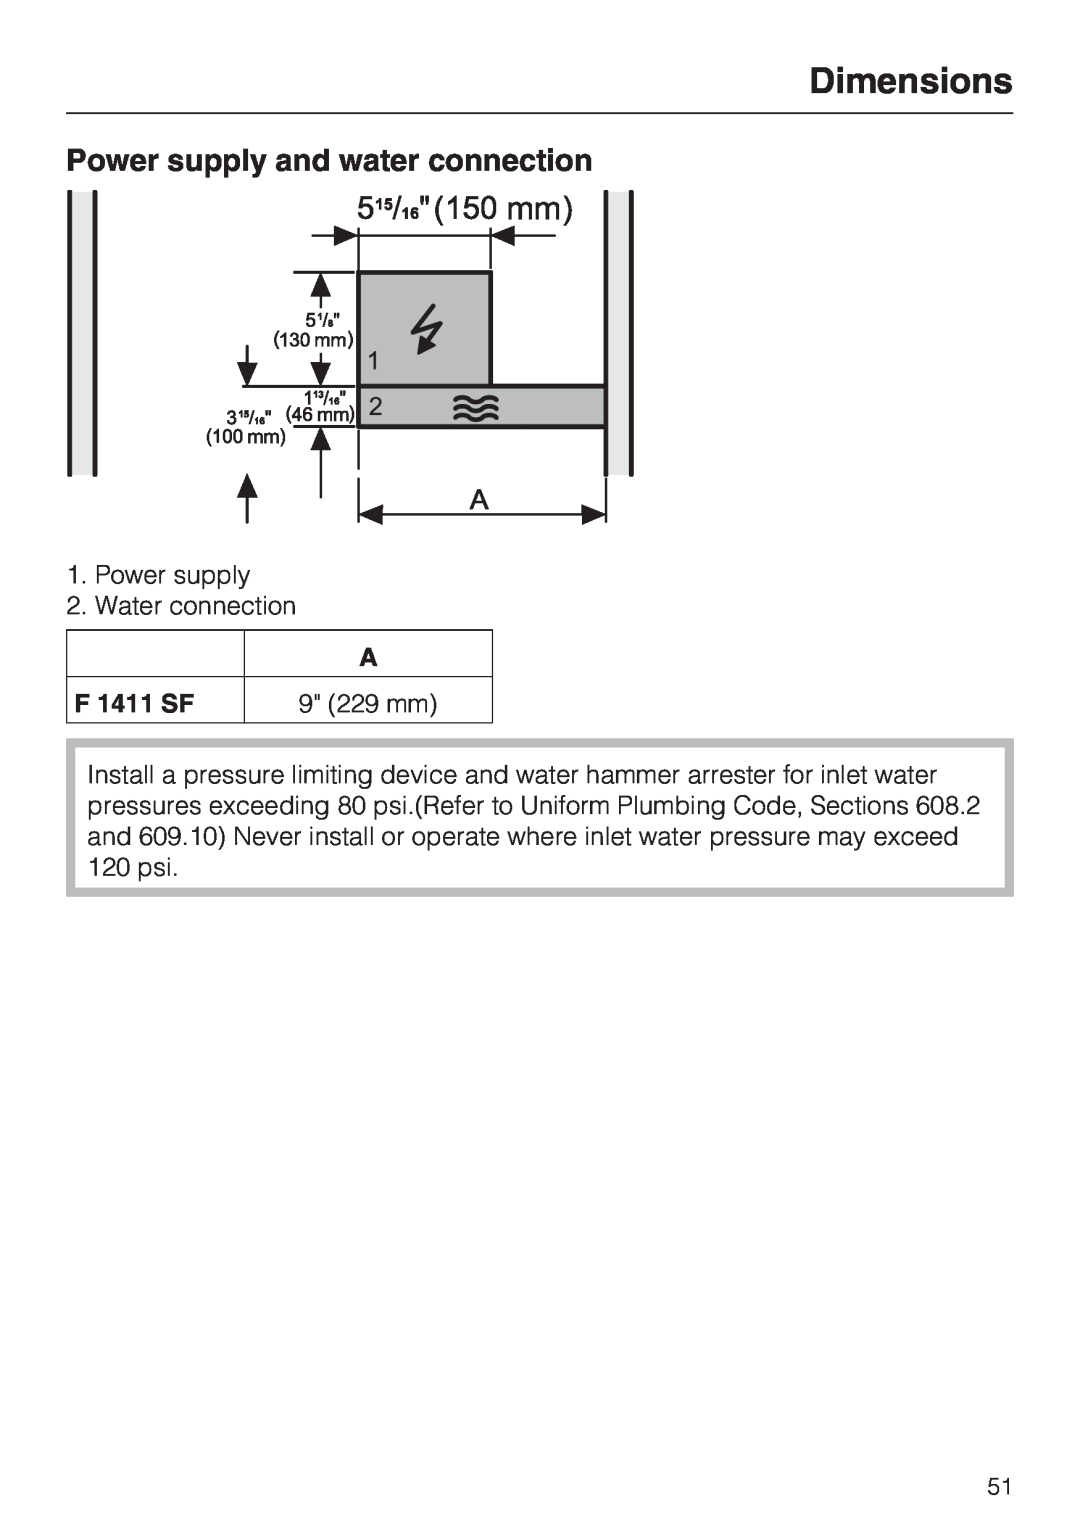 Miele F 1411 SF installation instructions Power supply and water connection, Dimensions, 9 229 mm 